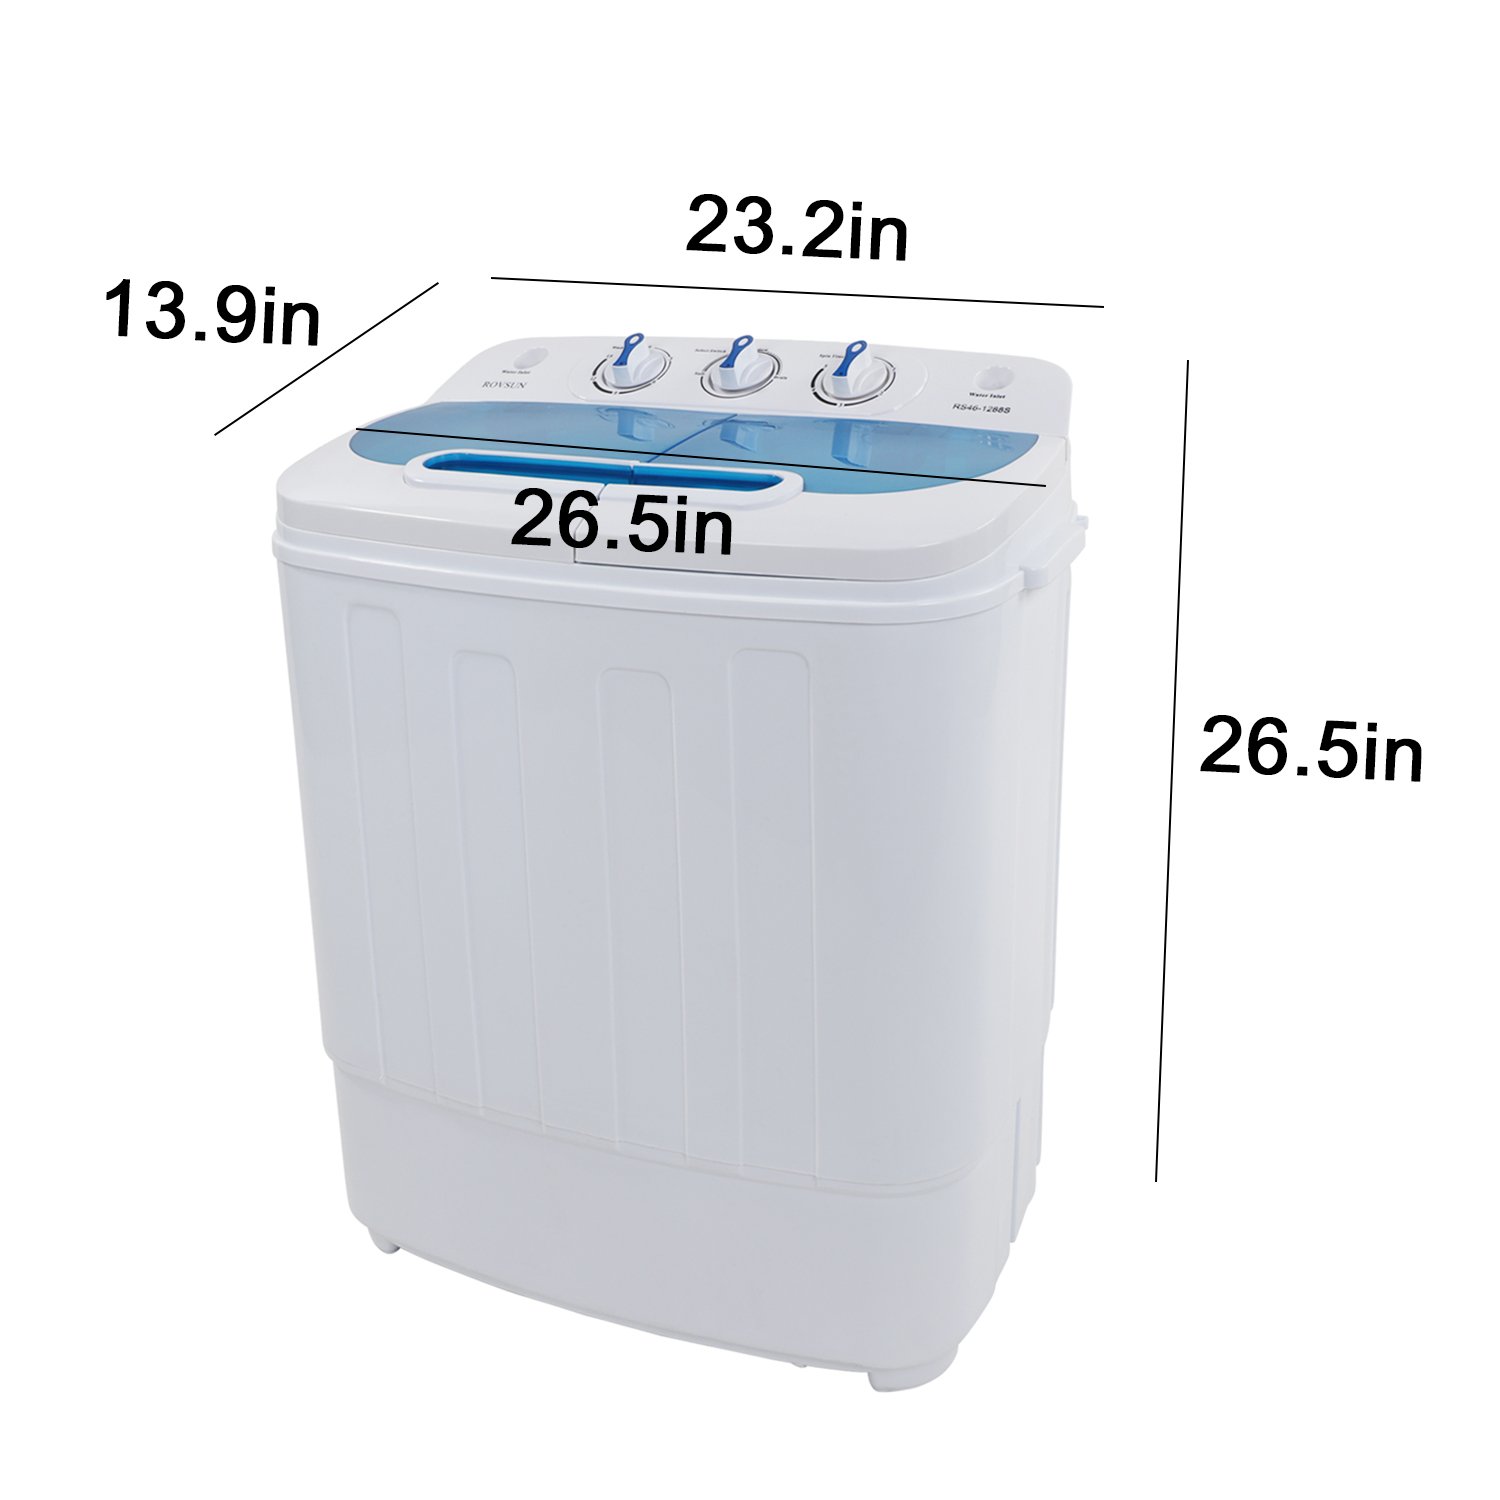 ROVSUN 15LBS Portable Washing Machine with Draining Pump, Electric Mini Washer with Twin Tub, Great for Home RV Camping Mini Dorms Apartments College